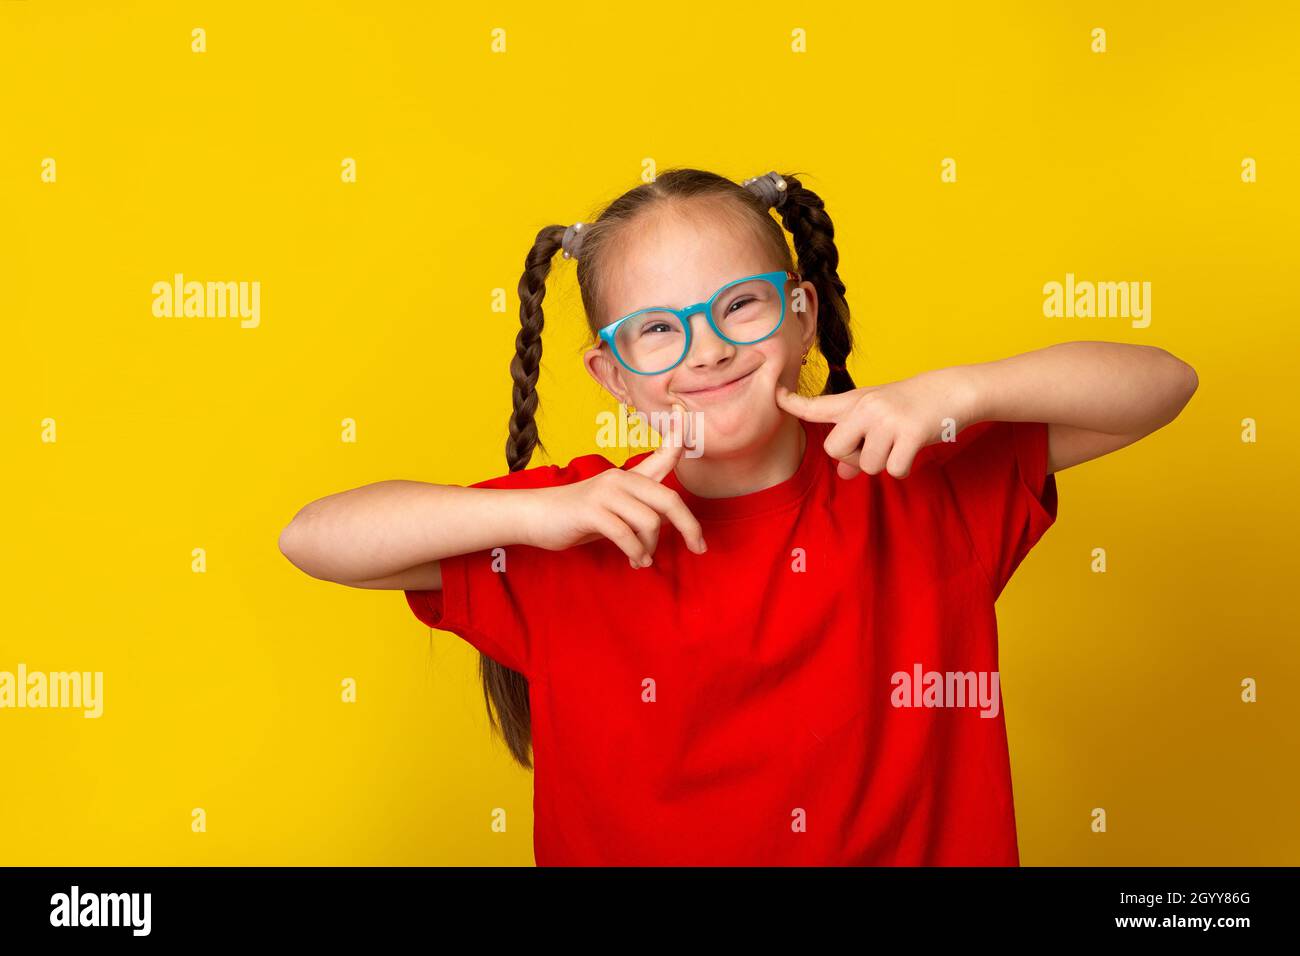 Happy girl with Down syndrome. Having fun, laughing. Funny pigtails. Studio. Portrait on a yellow background Stock Photo